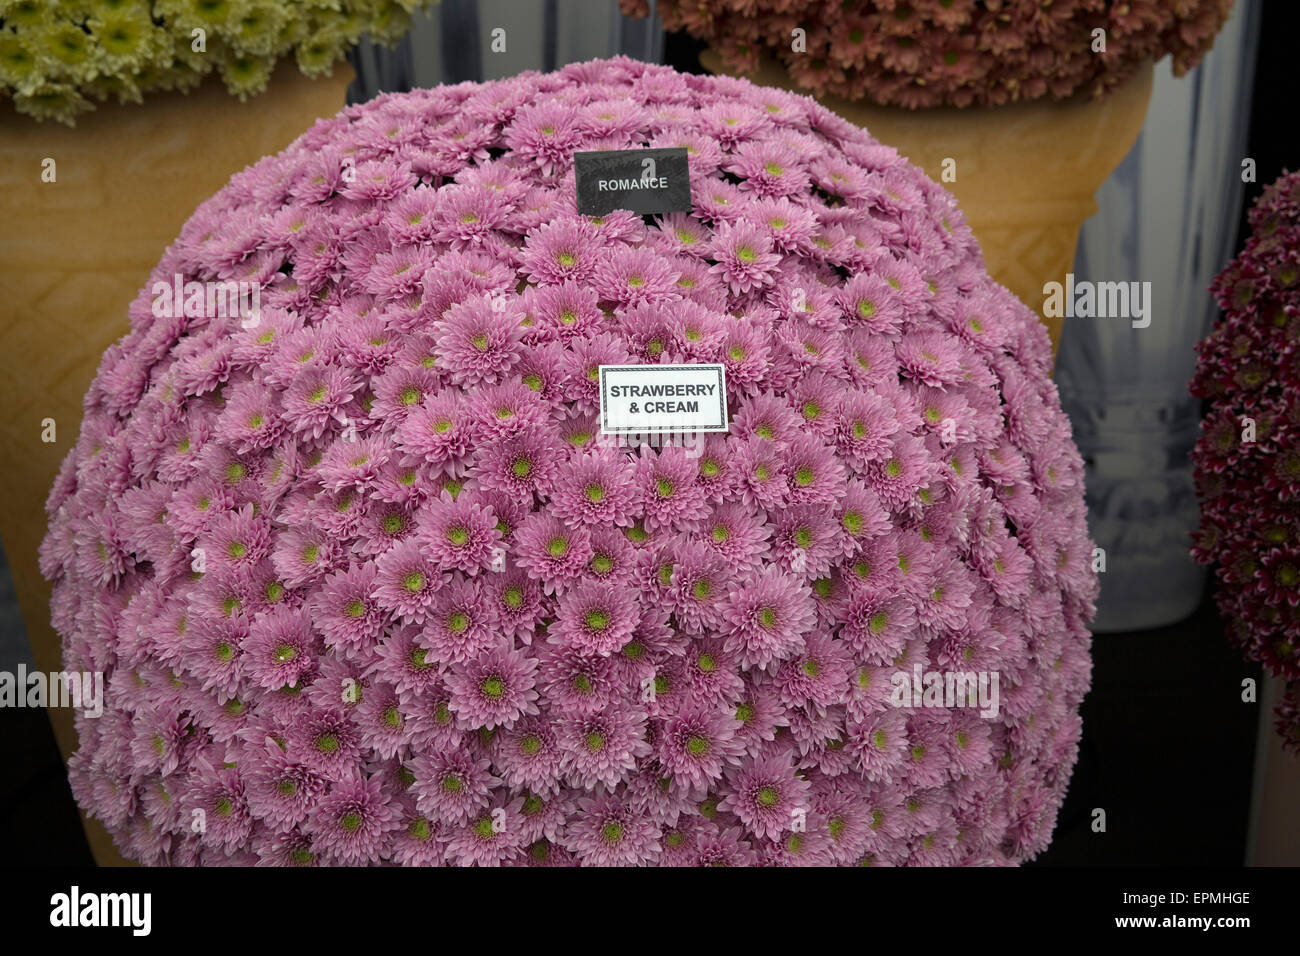 Romance Chrysanthemums on display at Chelsea Flower Show 2015 Stock Photo